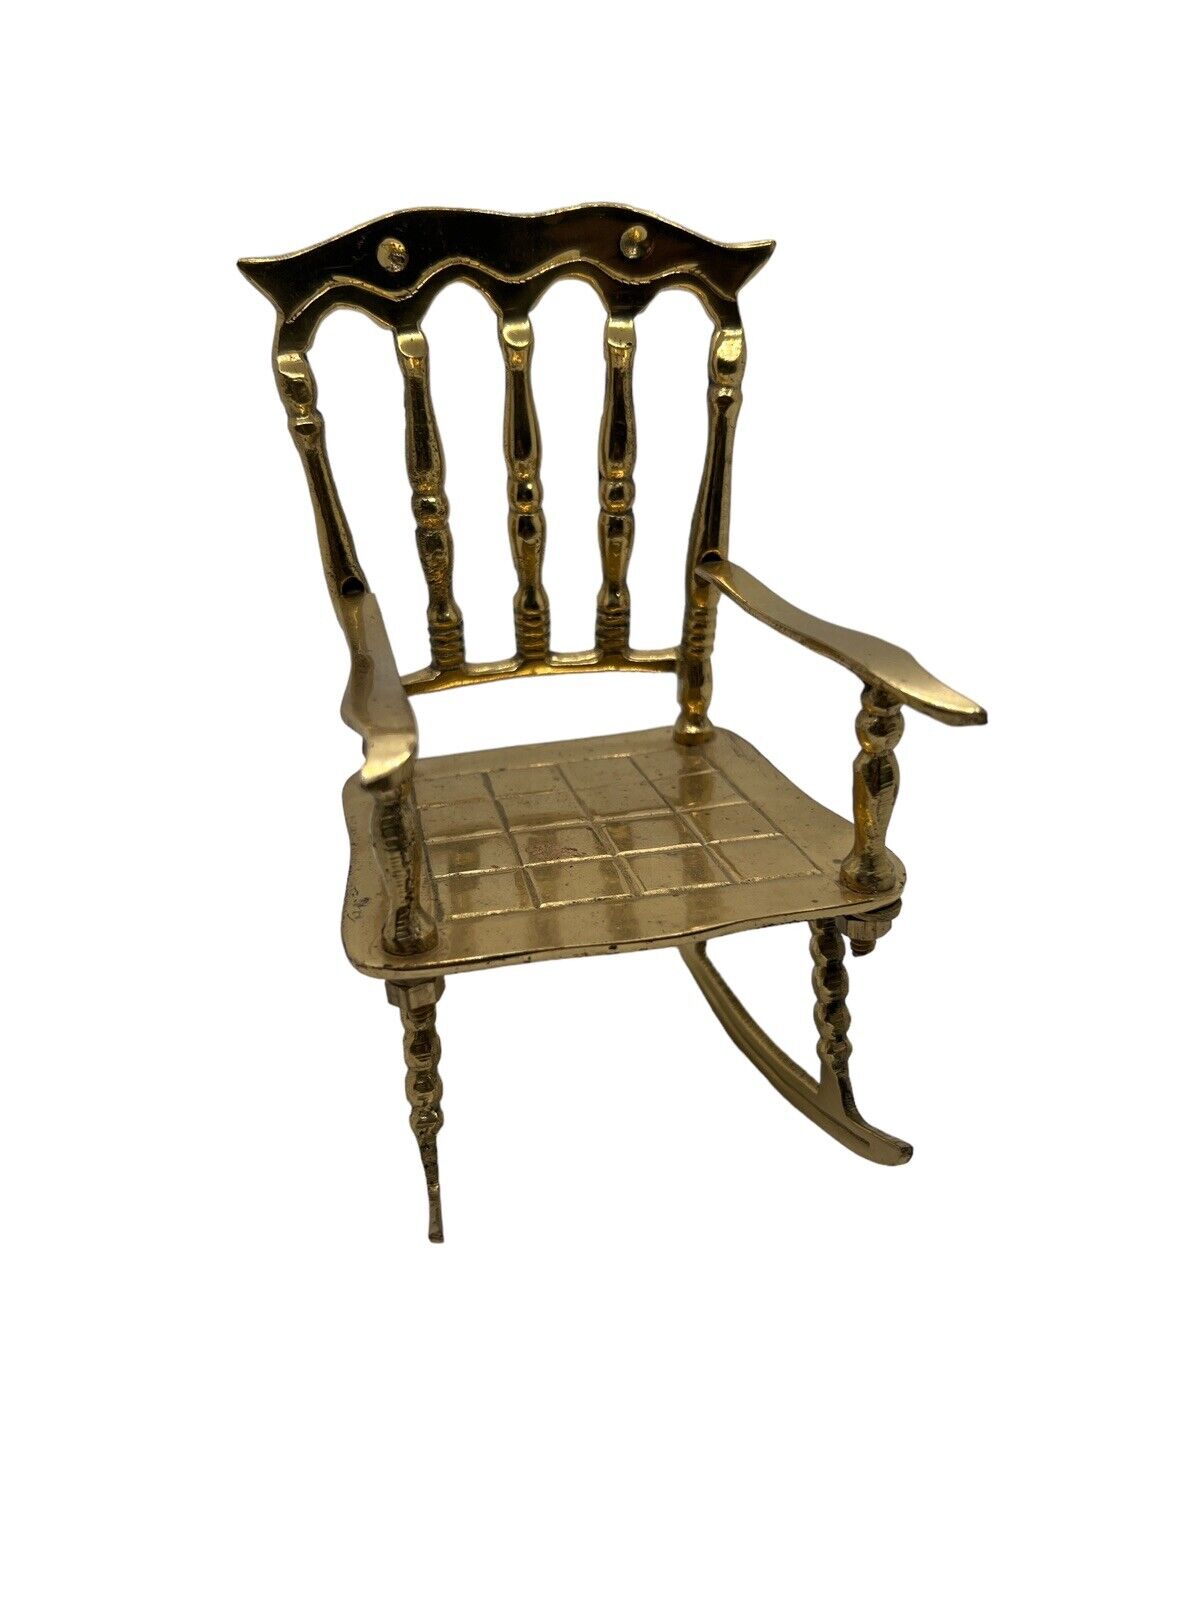 Small Vintage Solid Brass Rocking Chair 6”x4.5”x3.25”